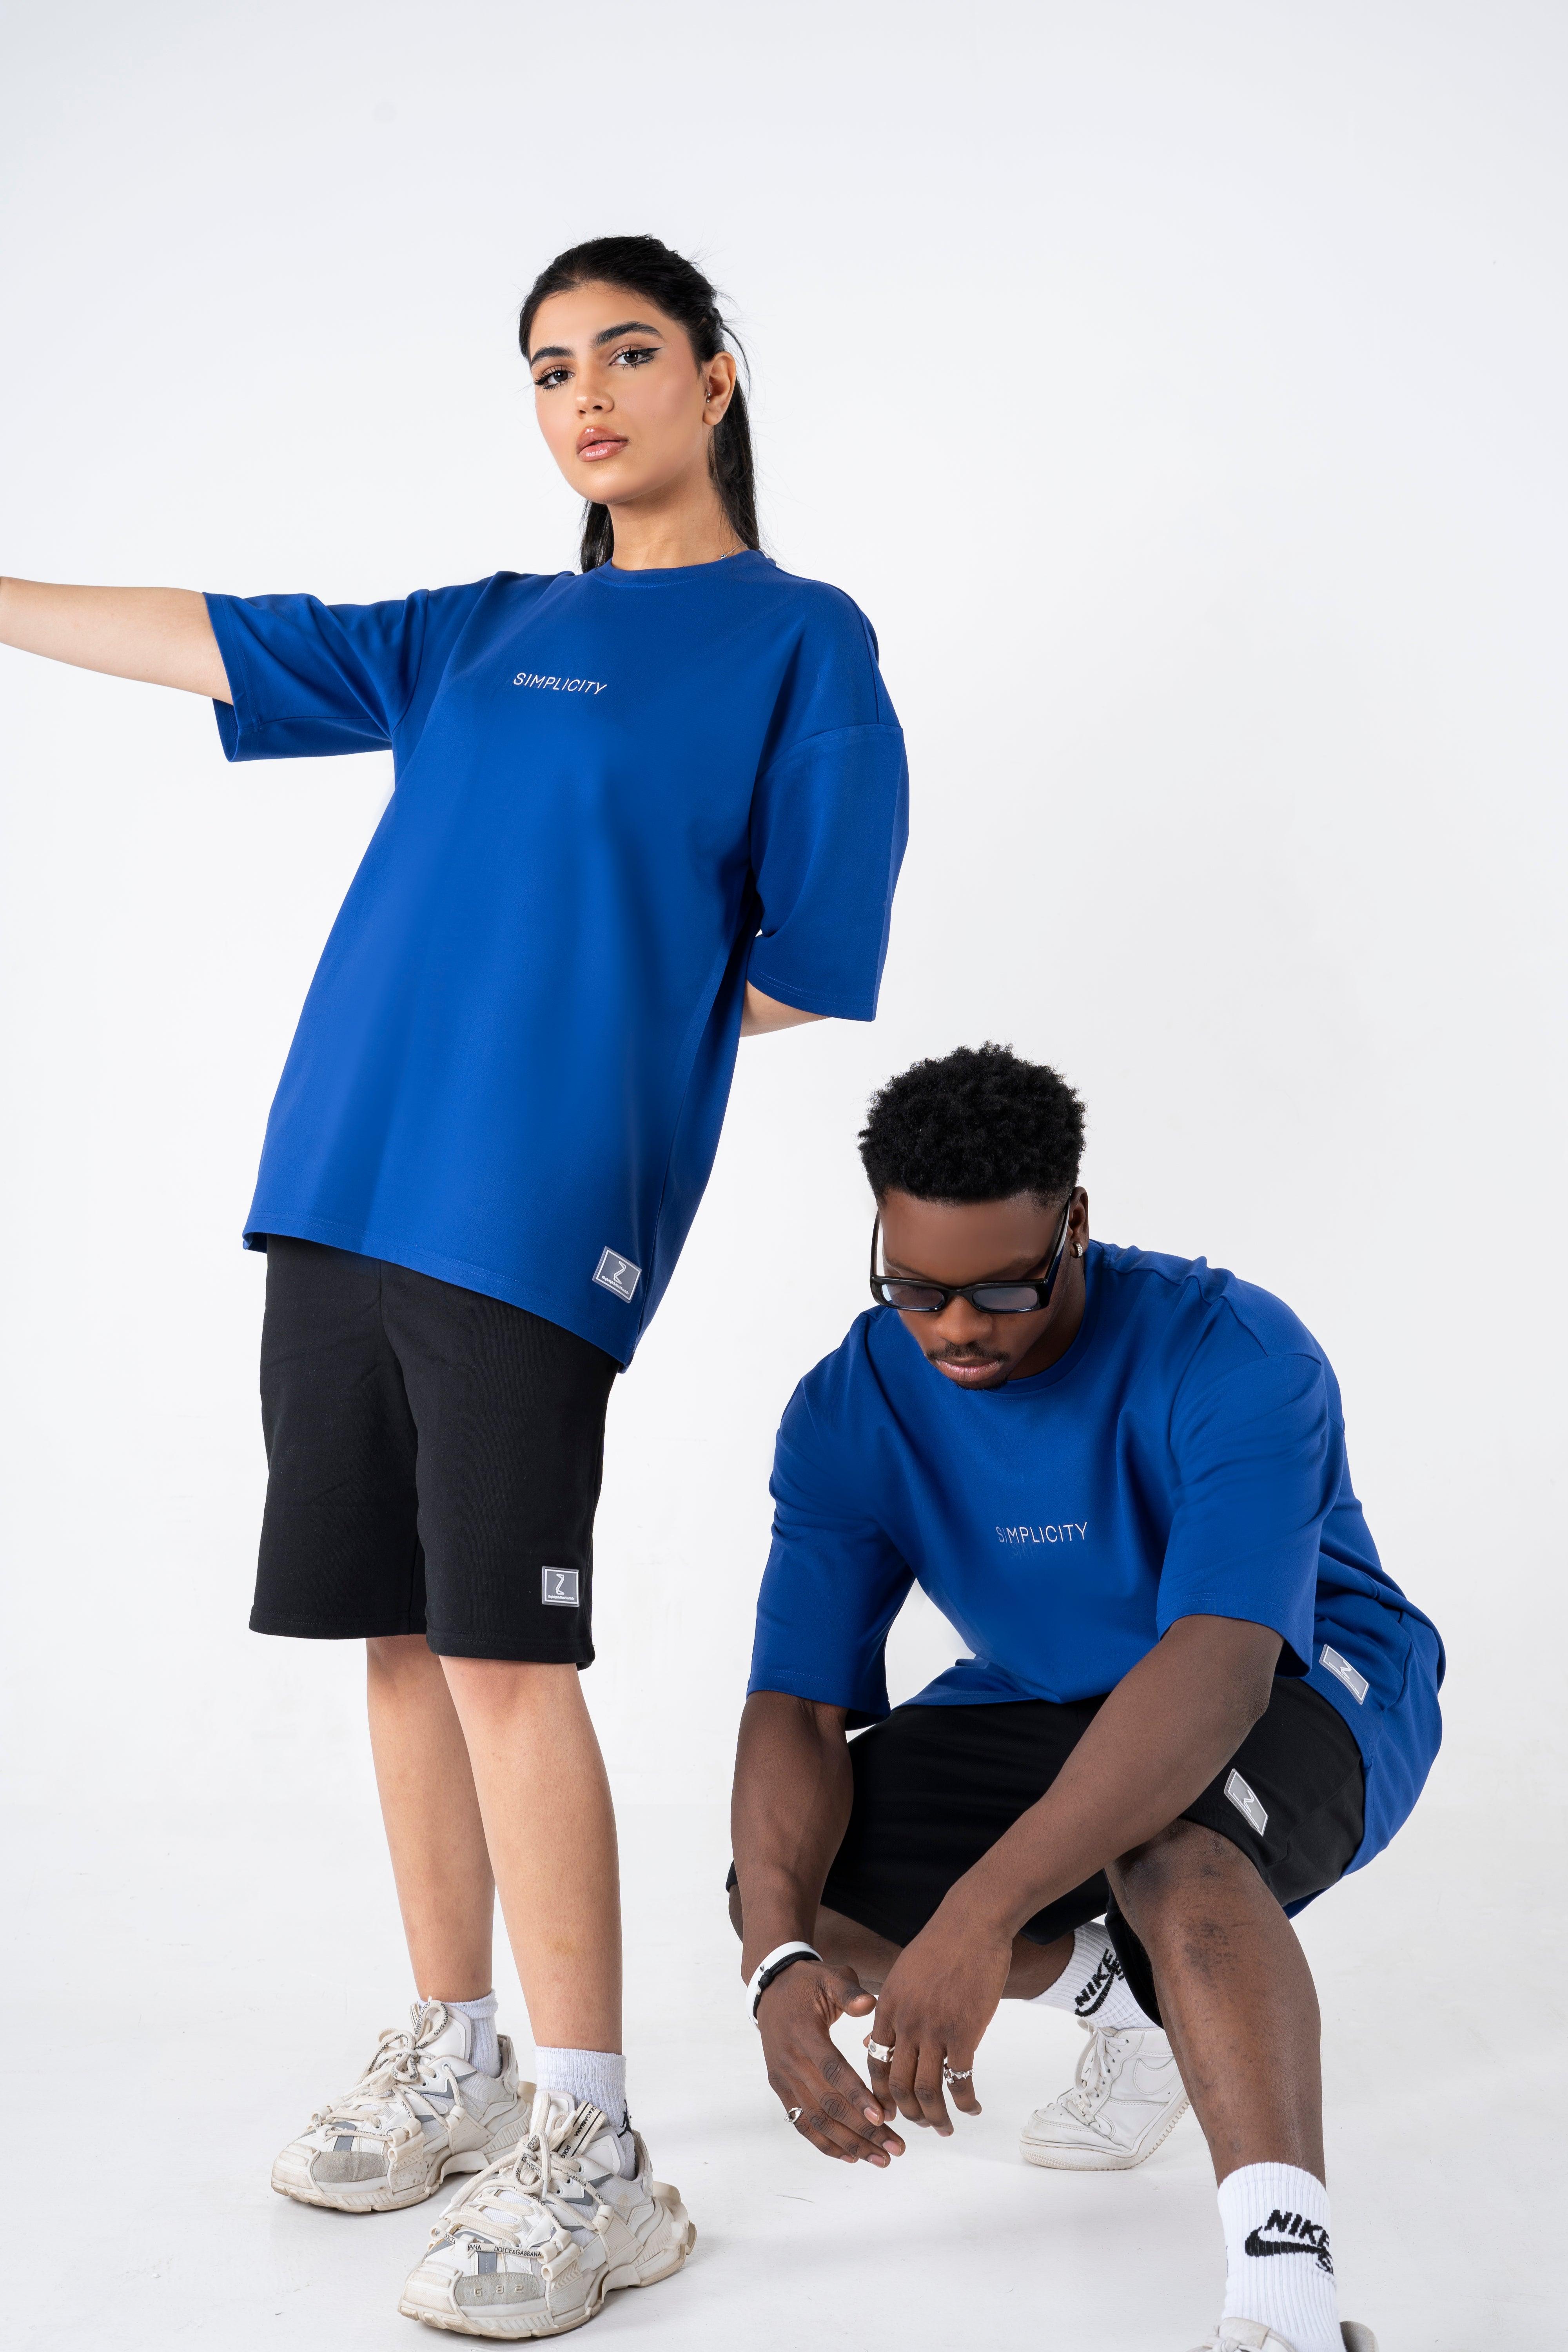 Blue Simplicity T-shirt From Z Brand - WECRE8